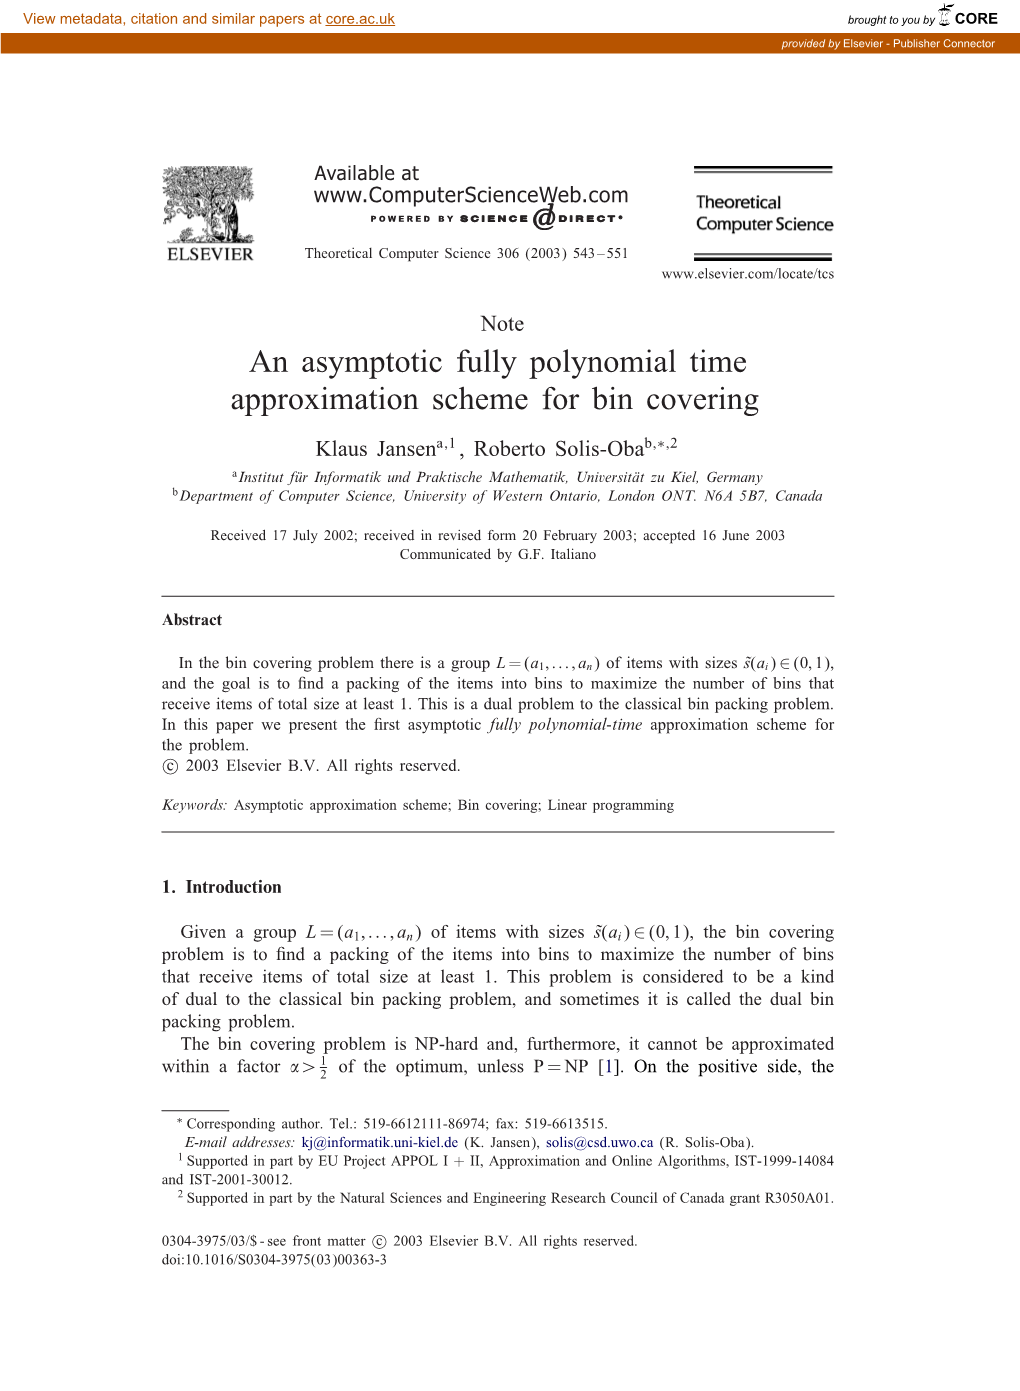 An Asymptotic Fully Polynomial Time Approximation Scheme for Bin Covering